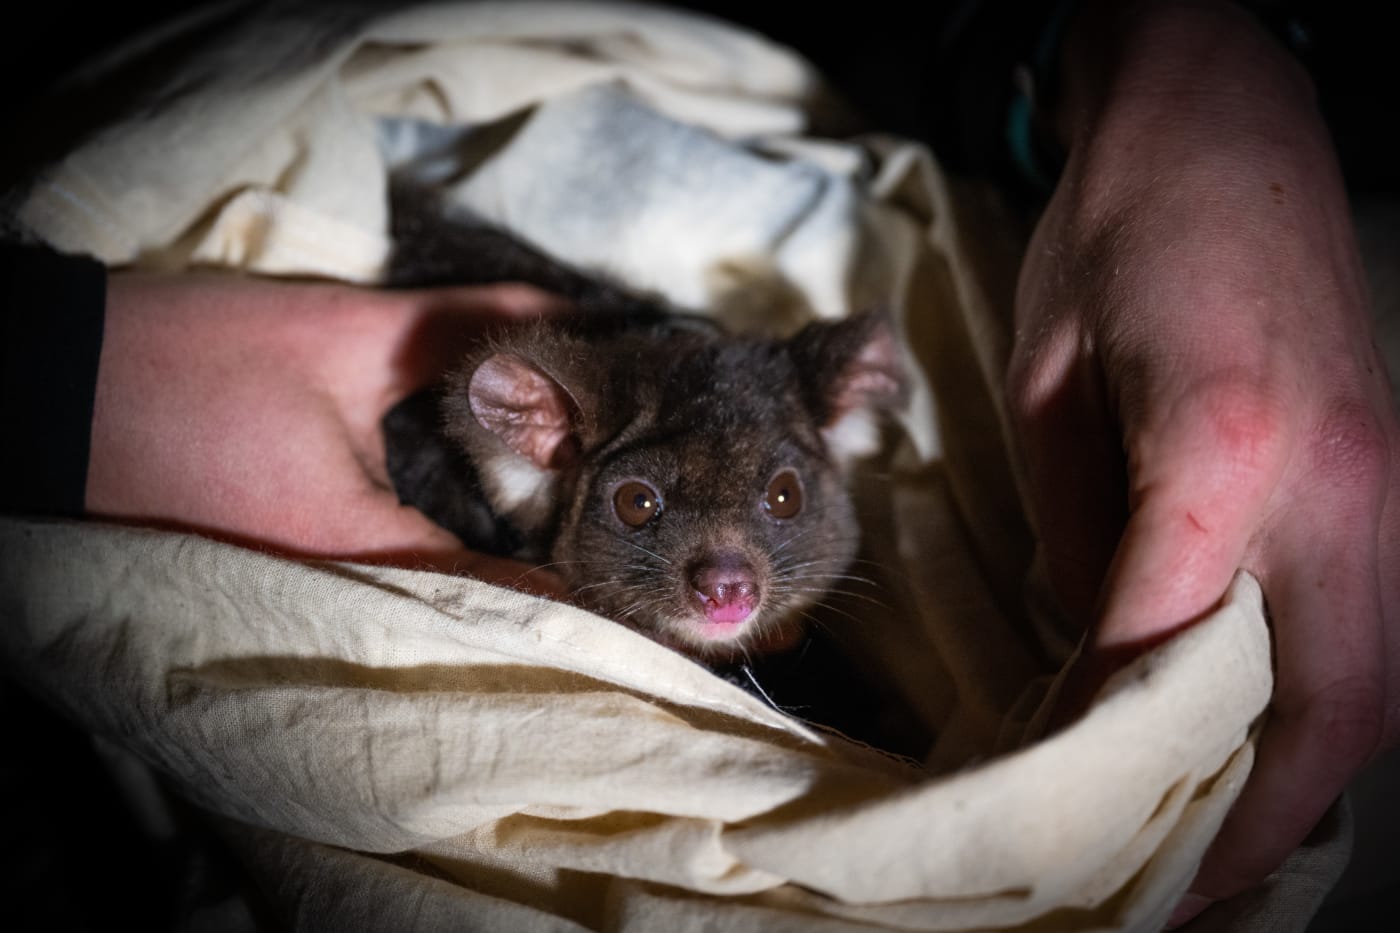 WWF-Australia is partnering with The University of Sydney to deploy GPS collars on greater gliders to get one of the worlds first high-resolution looks into greater glider home ranges and habitat use in bushfire-impacted forests.